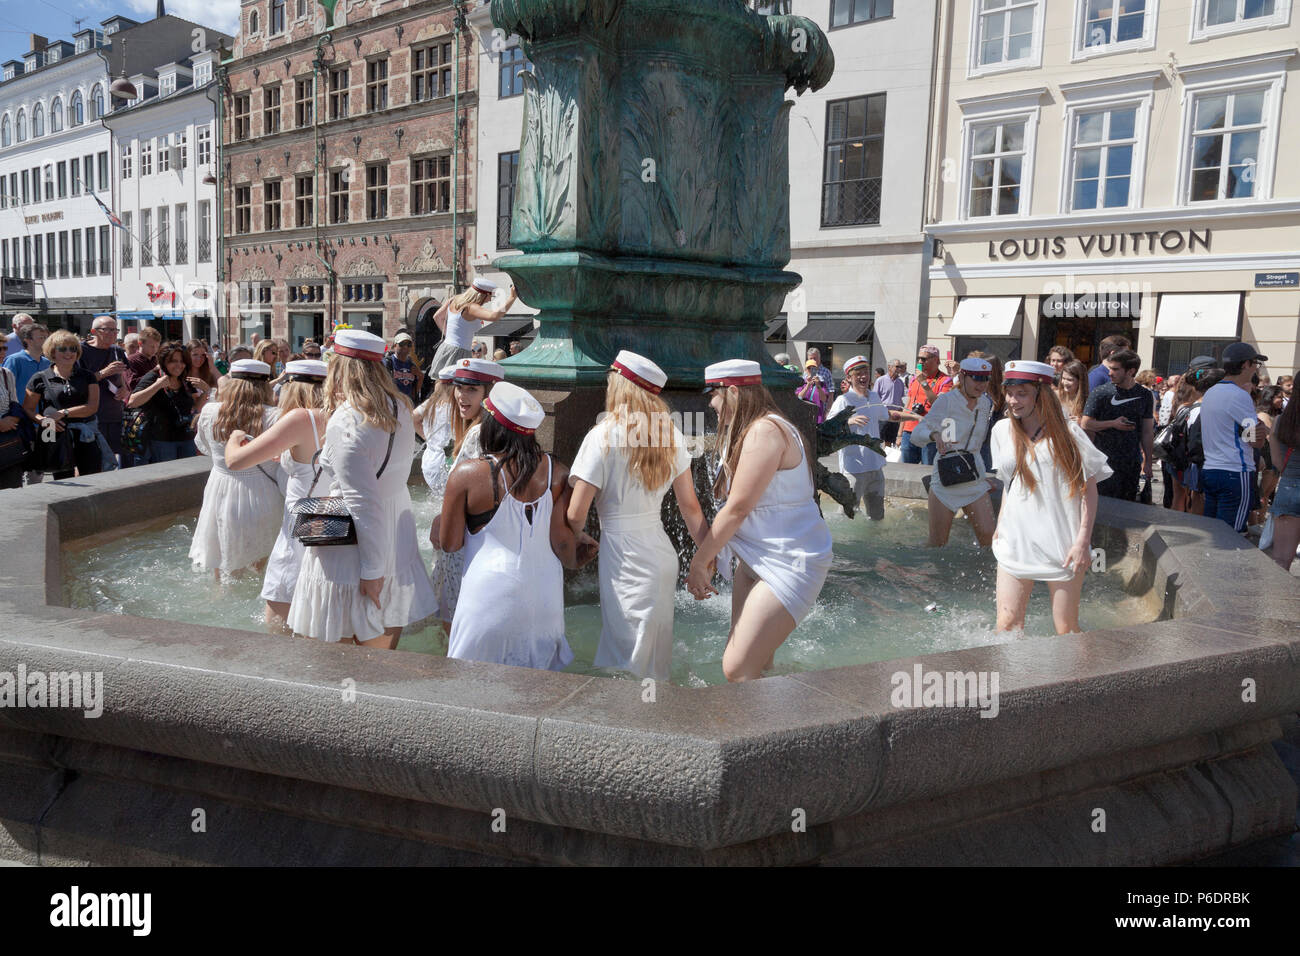 Copenhagen, Denmark. June 29, 2018. Danish students celebrate their high school / grammer school graduation and take the plunge. A dance around and a dip or dive into the cold water of the Stork Fountain (Storkespringvandet) on the pedestrian street, Stroeget, is a traditional element on the day of celebration for  graduated students in Greater Copenhagen. It is often part of the long, exhausting and high-spirited truck tour visiting each student’s home for refreshments. Credit: Niels Quist/Alamy Live News Stock Photo